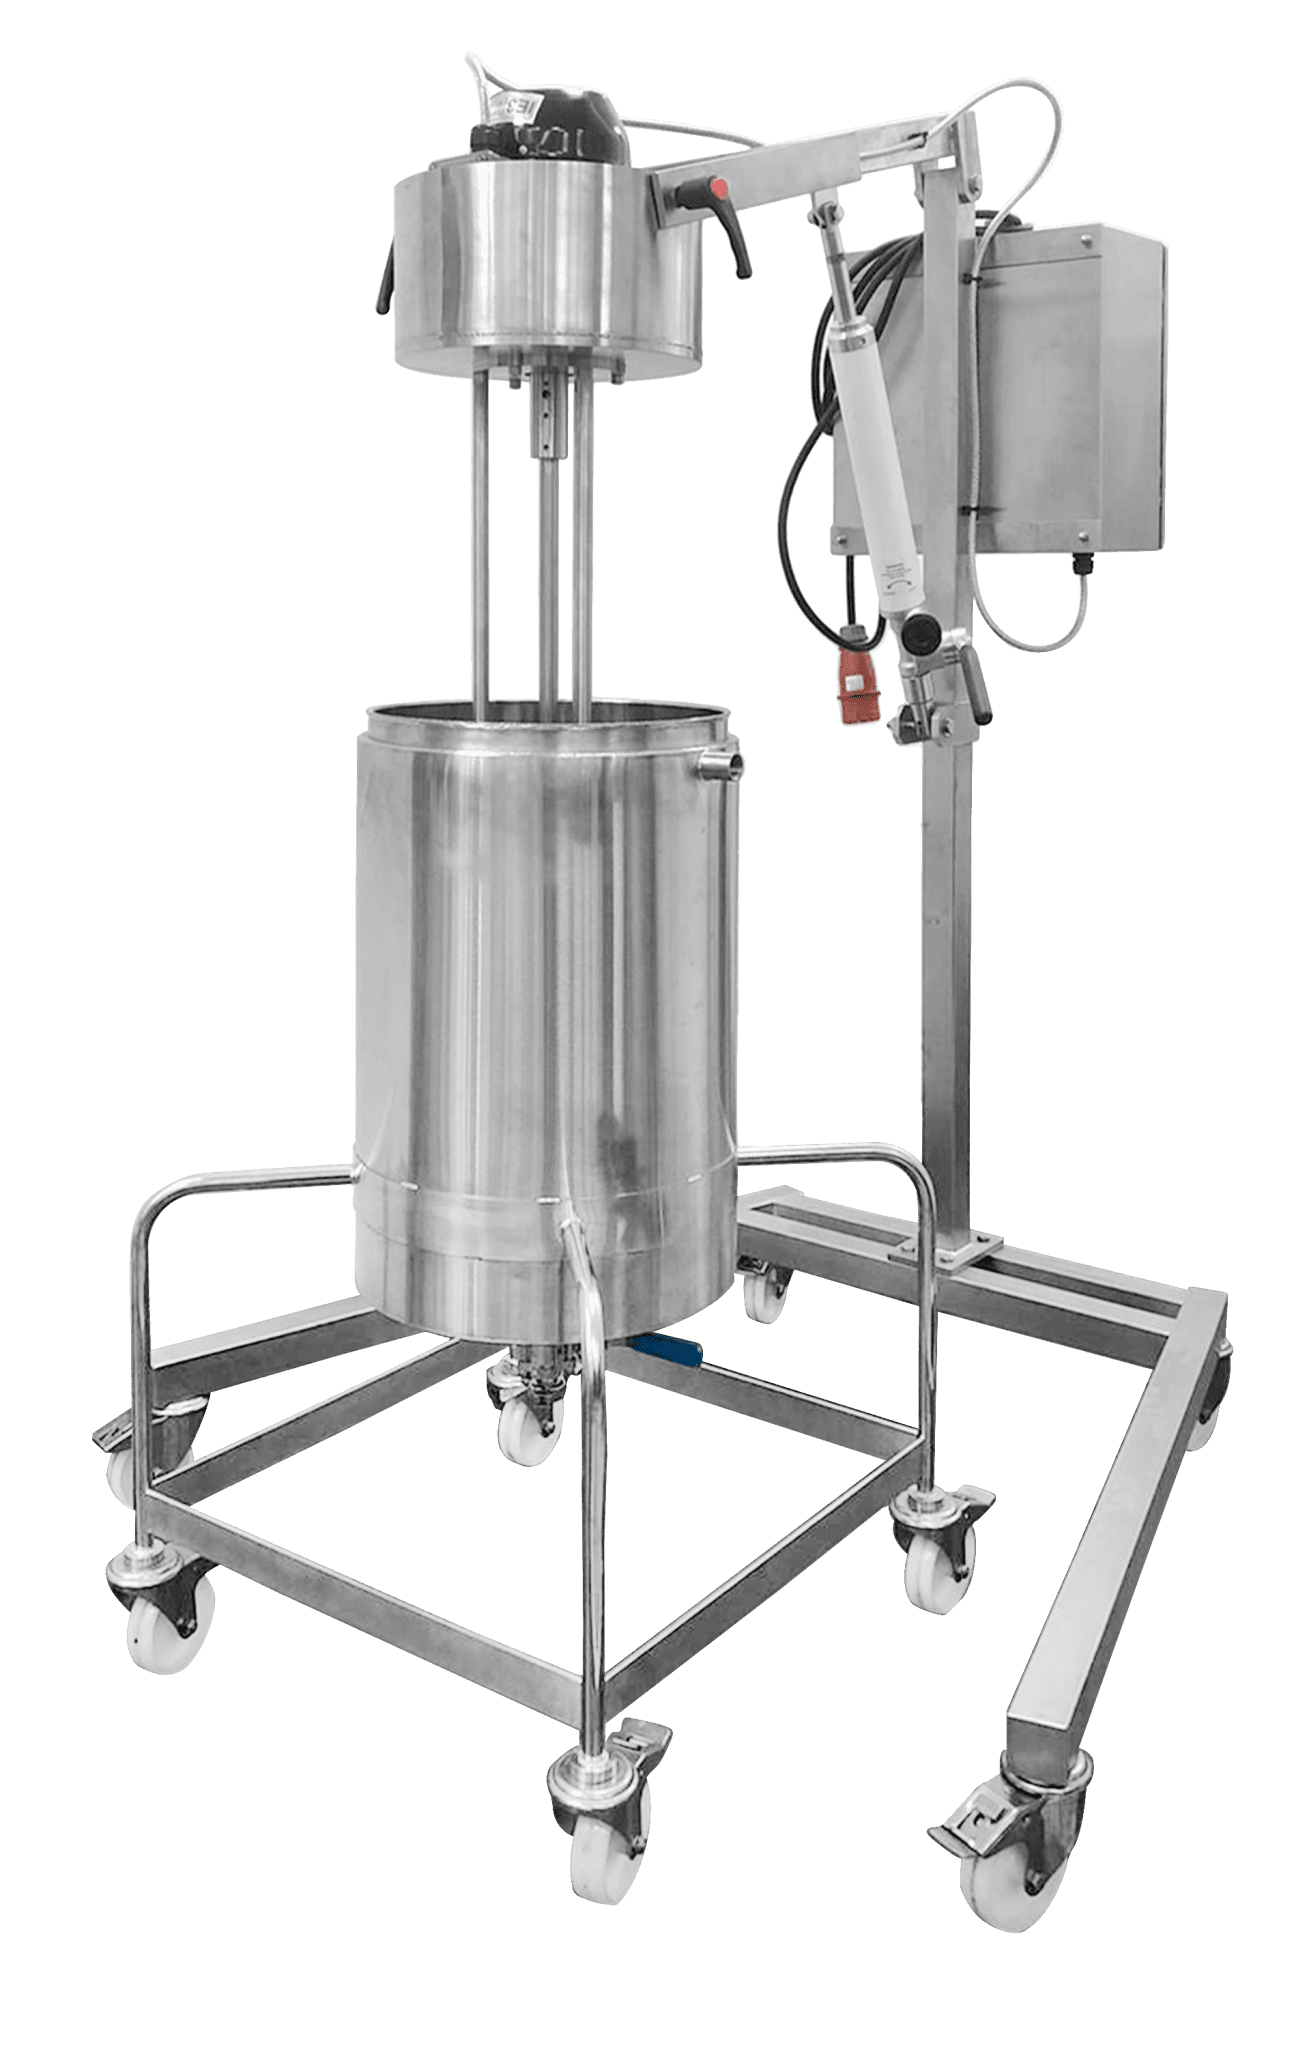 Mixing Vessel for manufacturing Dermatological Creams